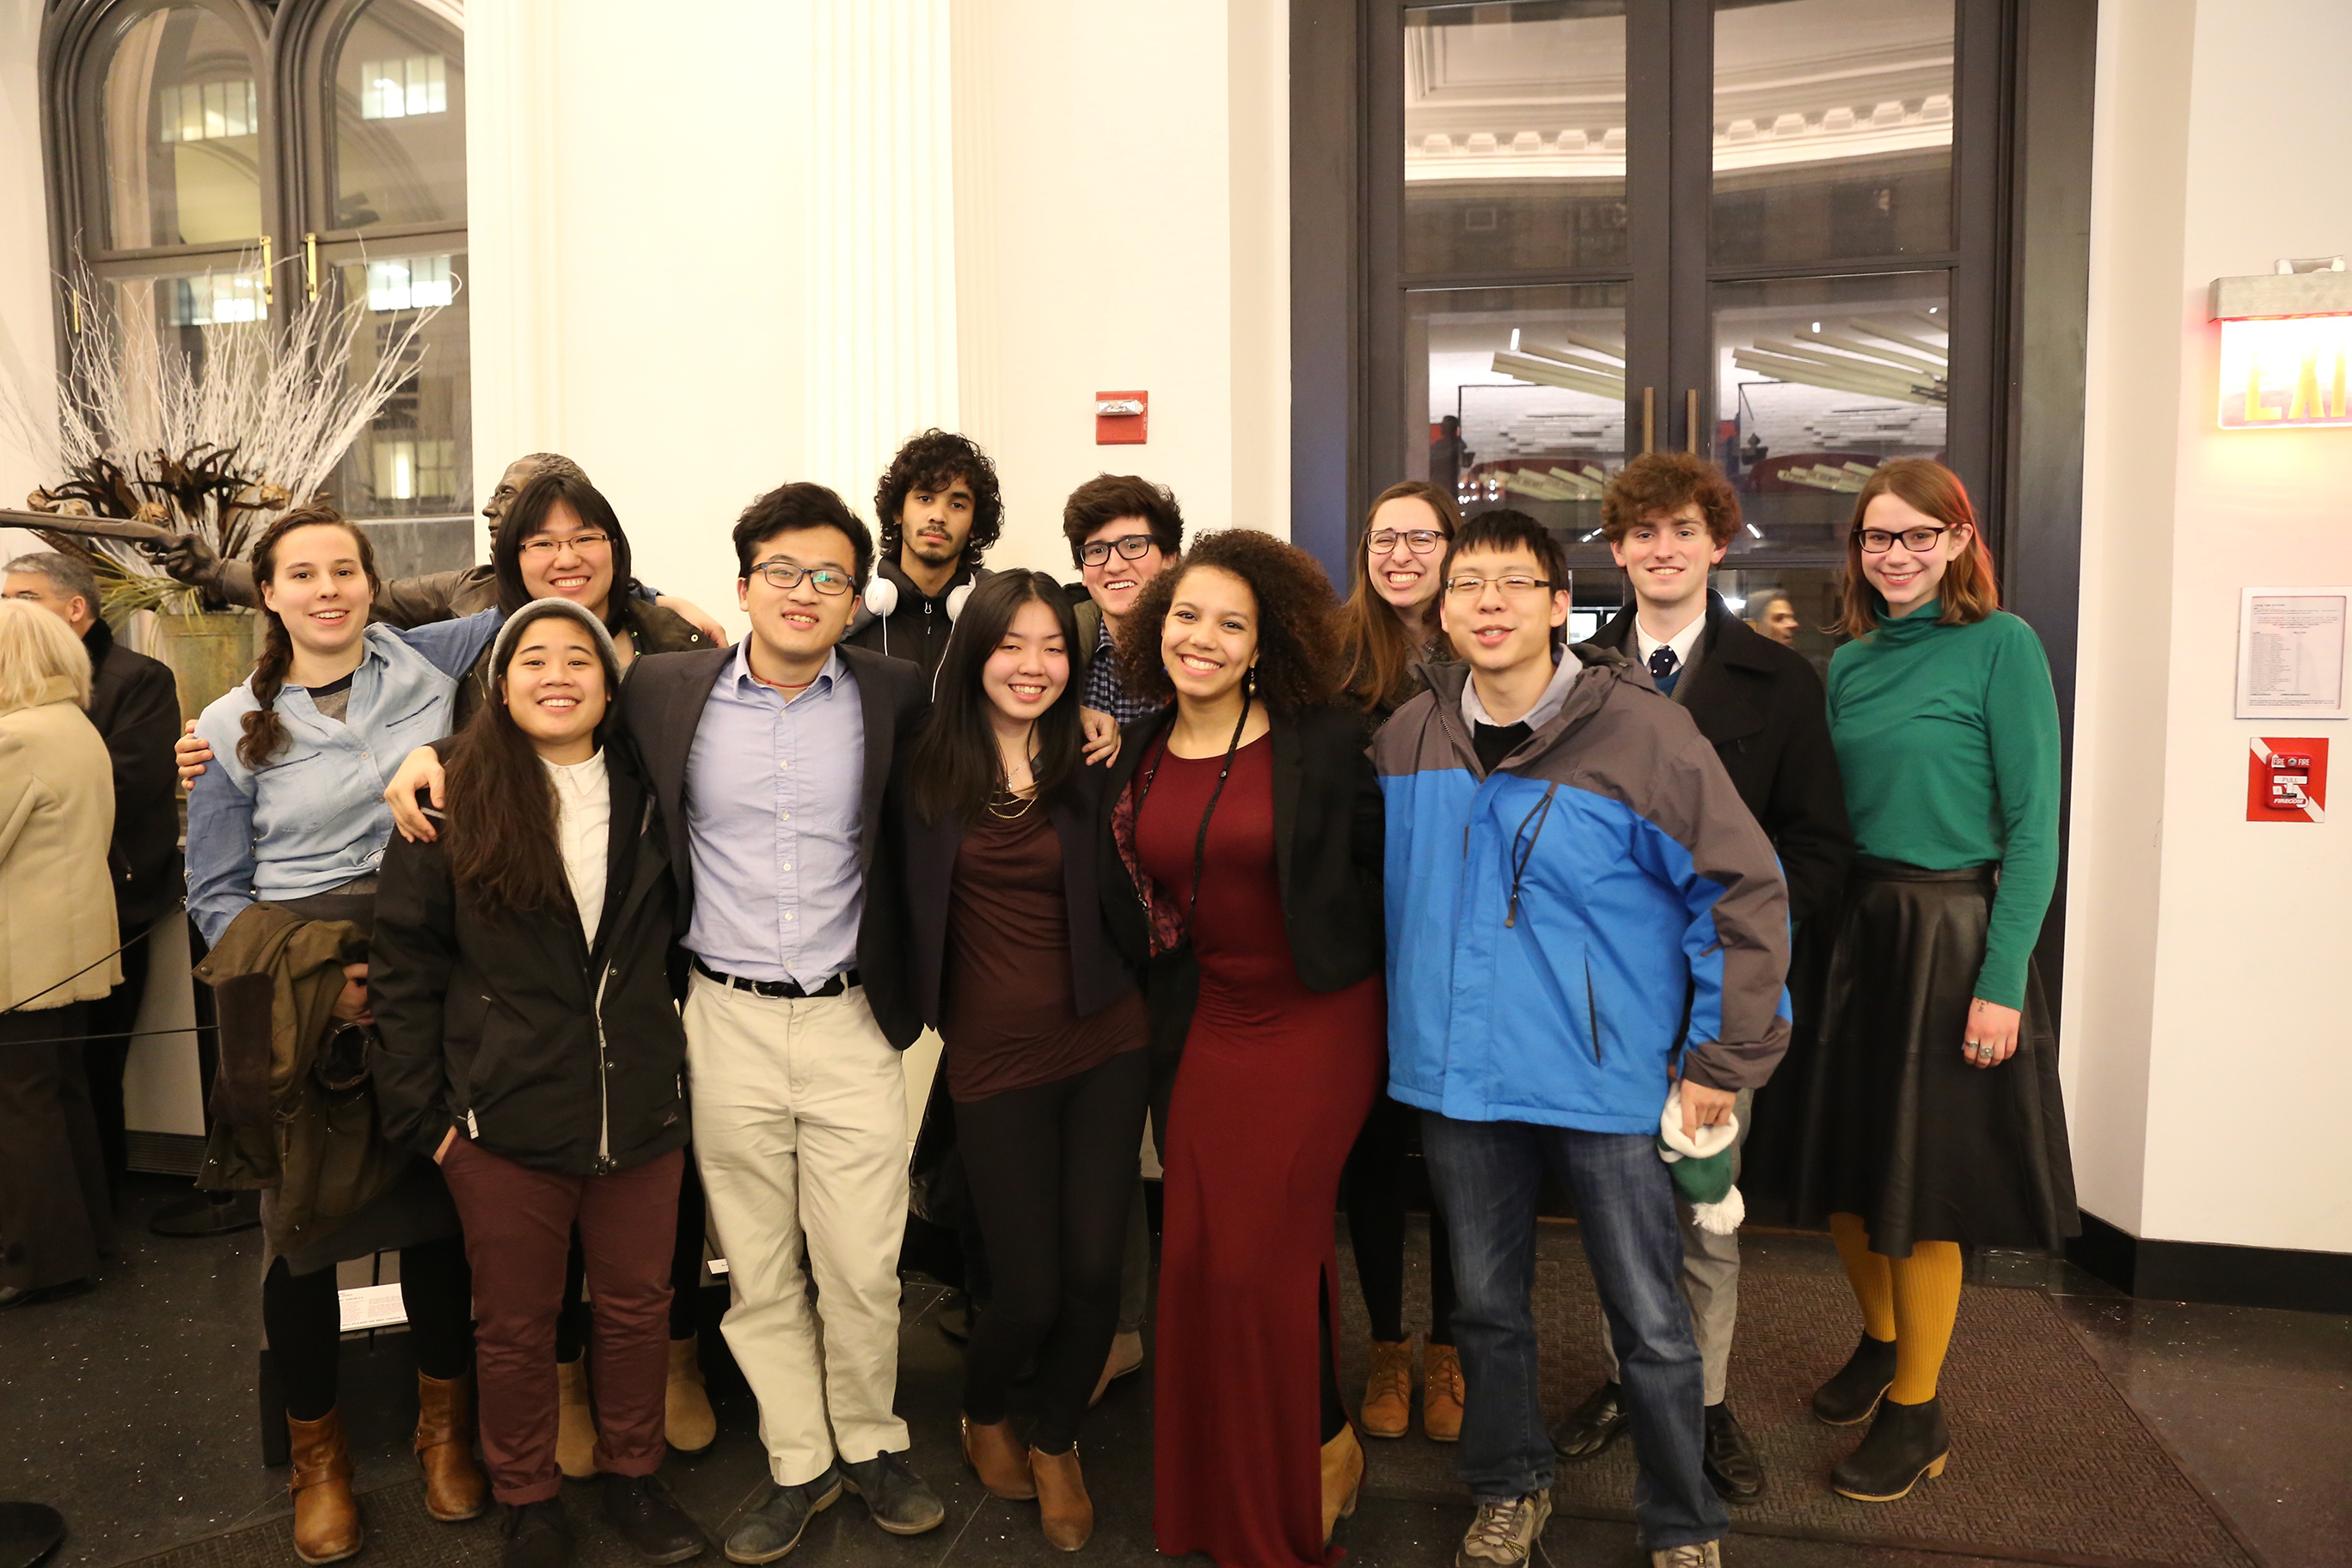 Front: Merisa Dion, Sitong Chen, Holly Chen, Aleta Brown, and Sterling Xie. Back: Phoebe Greenwald, Jessica Tang,Jake Blount, Bennett Glace, Jessye McGarry, Connor O'Brien and Zoe Bodzas.